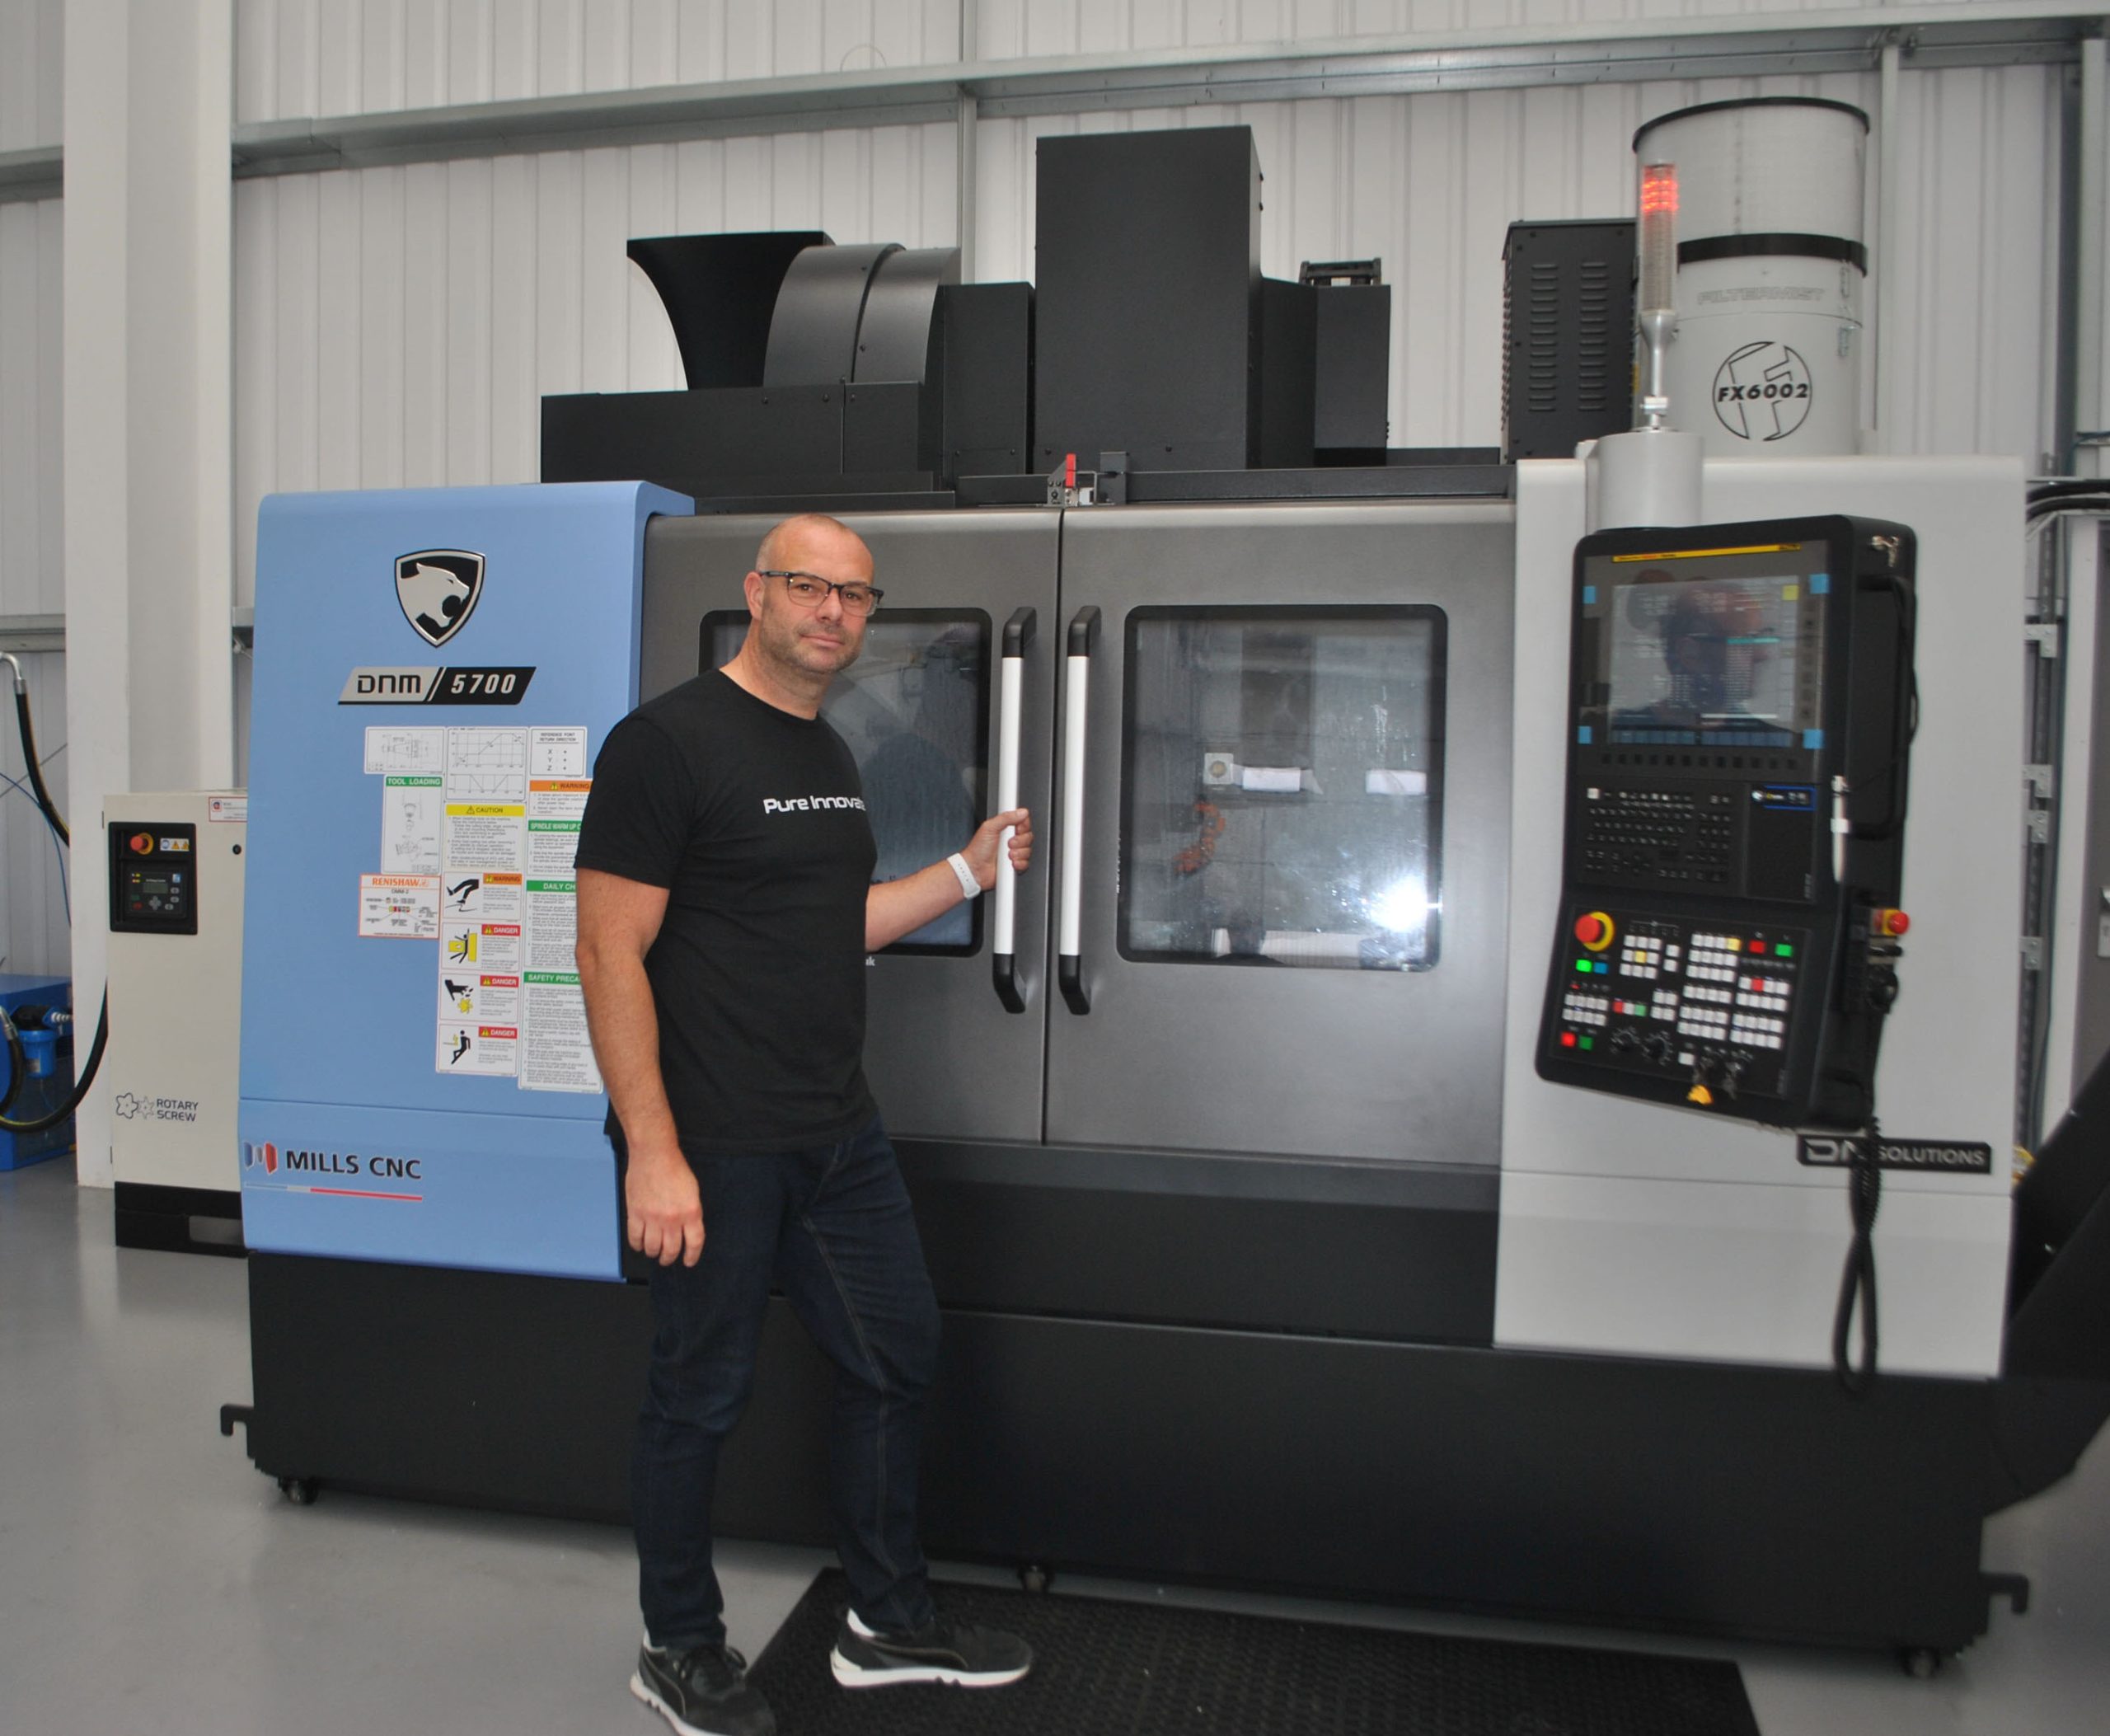 Operator standing by the doors of a DN Solutions DNM 5700 machining centre